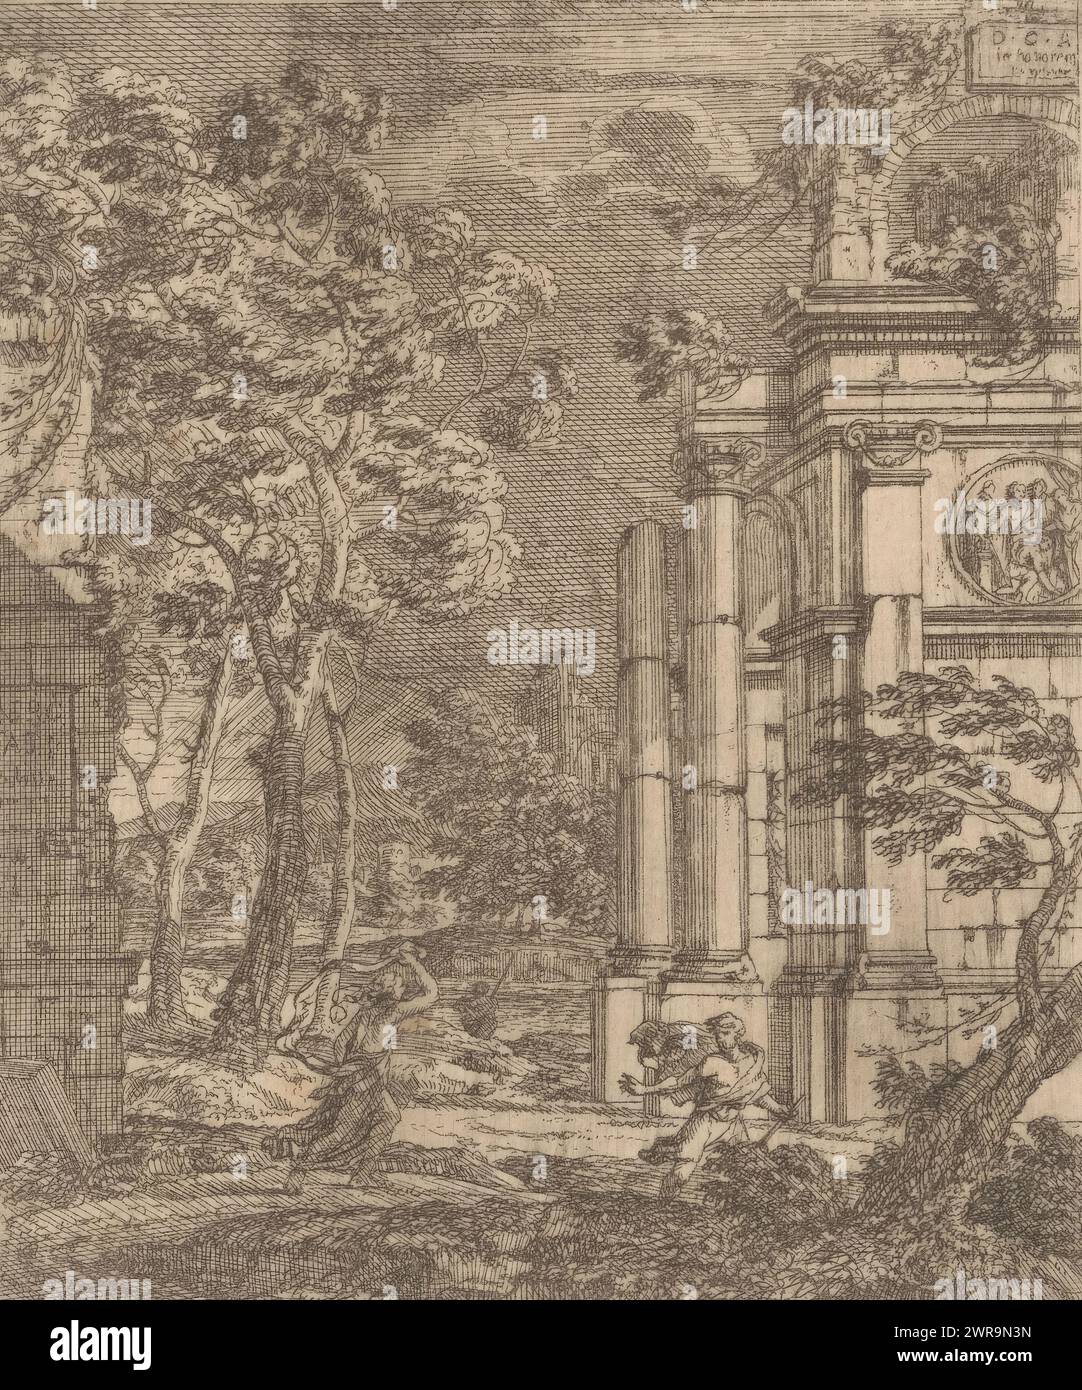 Landscape with three figures near ancient ruins, Ancient ruins and buildings (series title), Alcune Inventione de Ruini et Architectura (...) (series title), print maker: Johann Oswald Harms, 1673, paper, etching, height 122 mm × width 101 mm, print Stock Photo